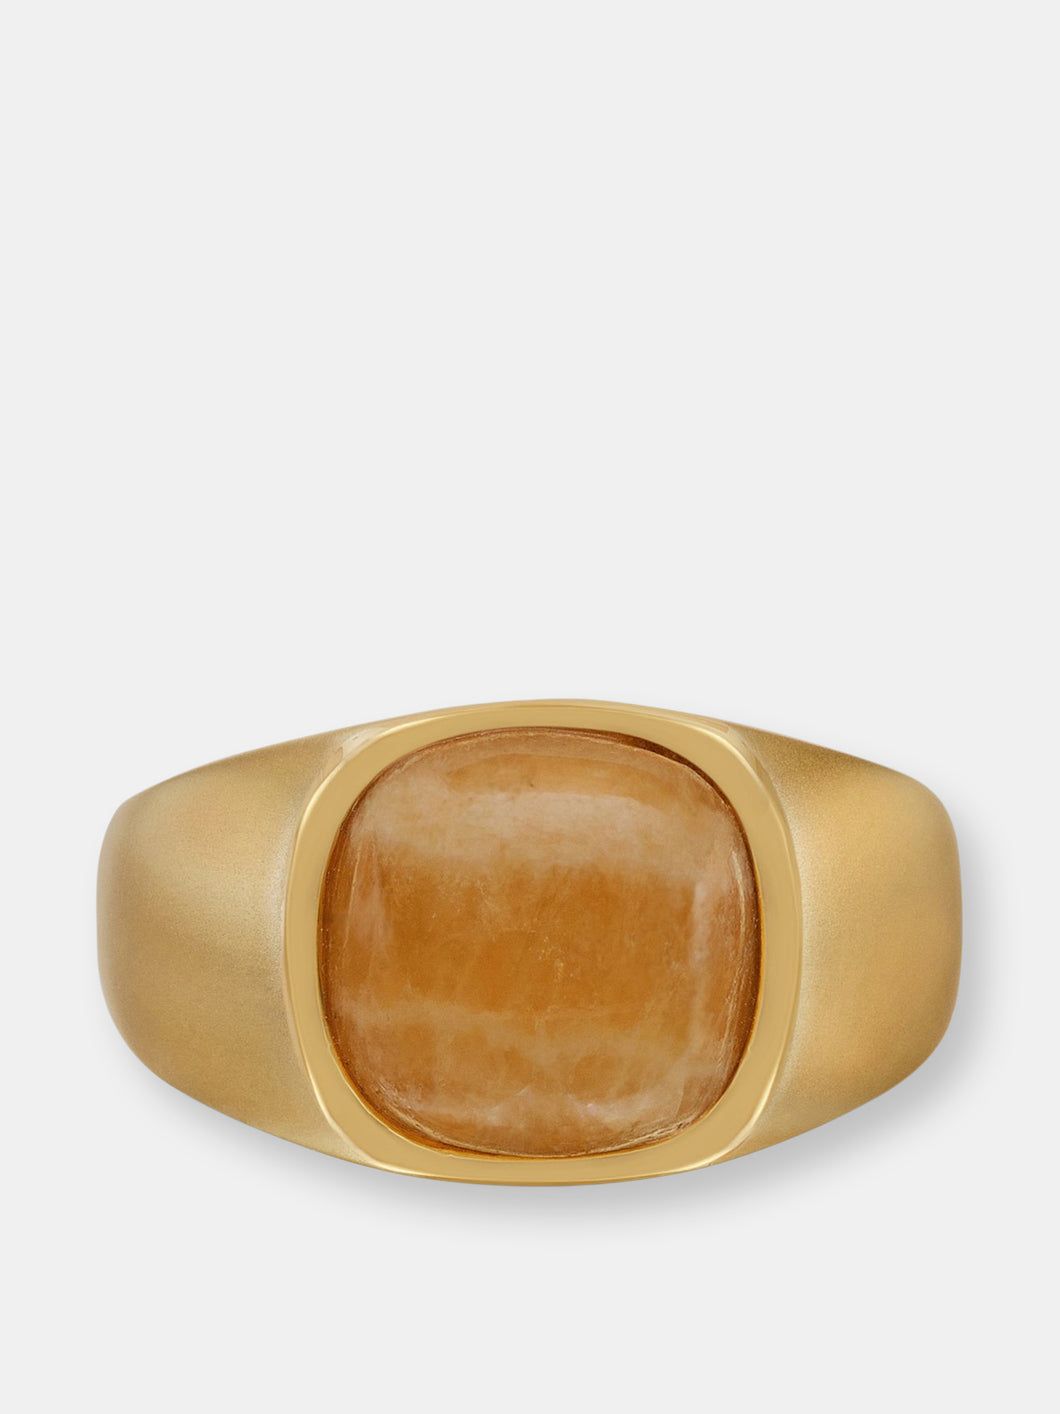 Yellow Lace Agate Stone Signet Ring in 14K Yellow Gold Plated Sterling Silver